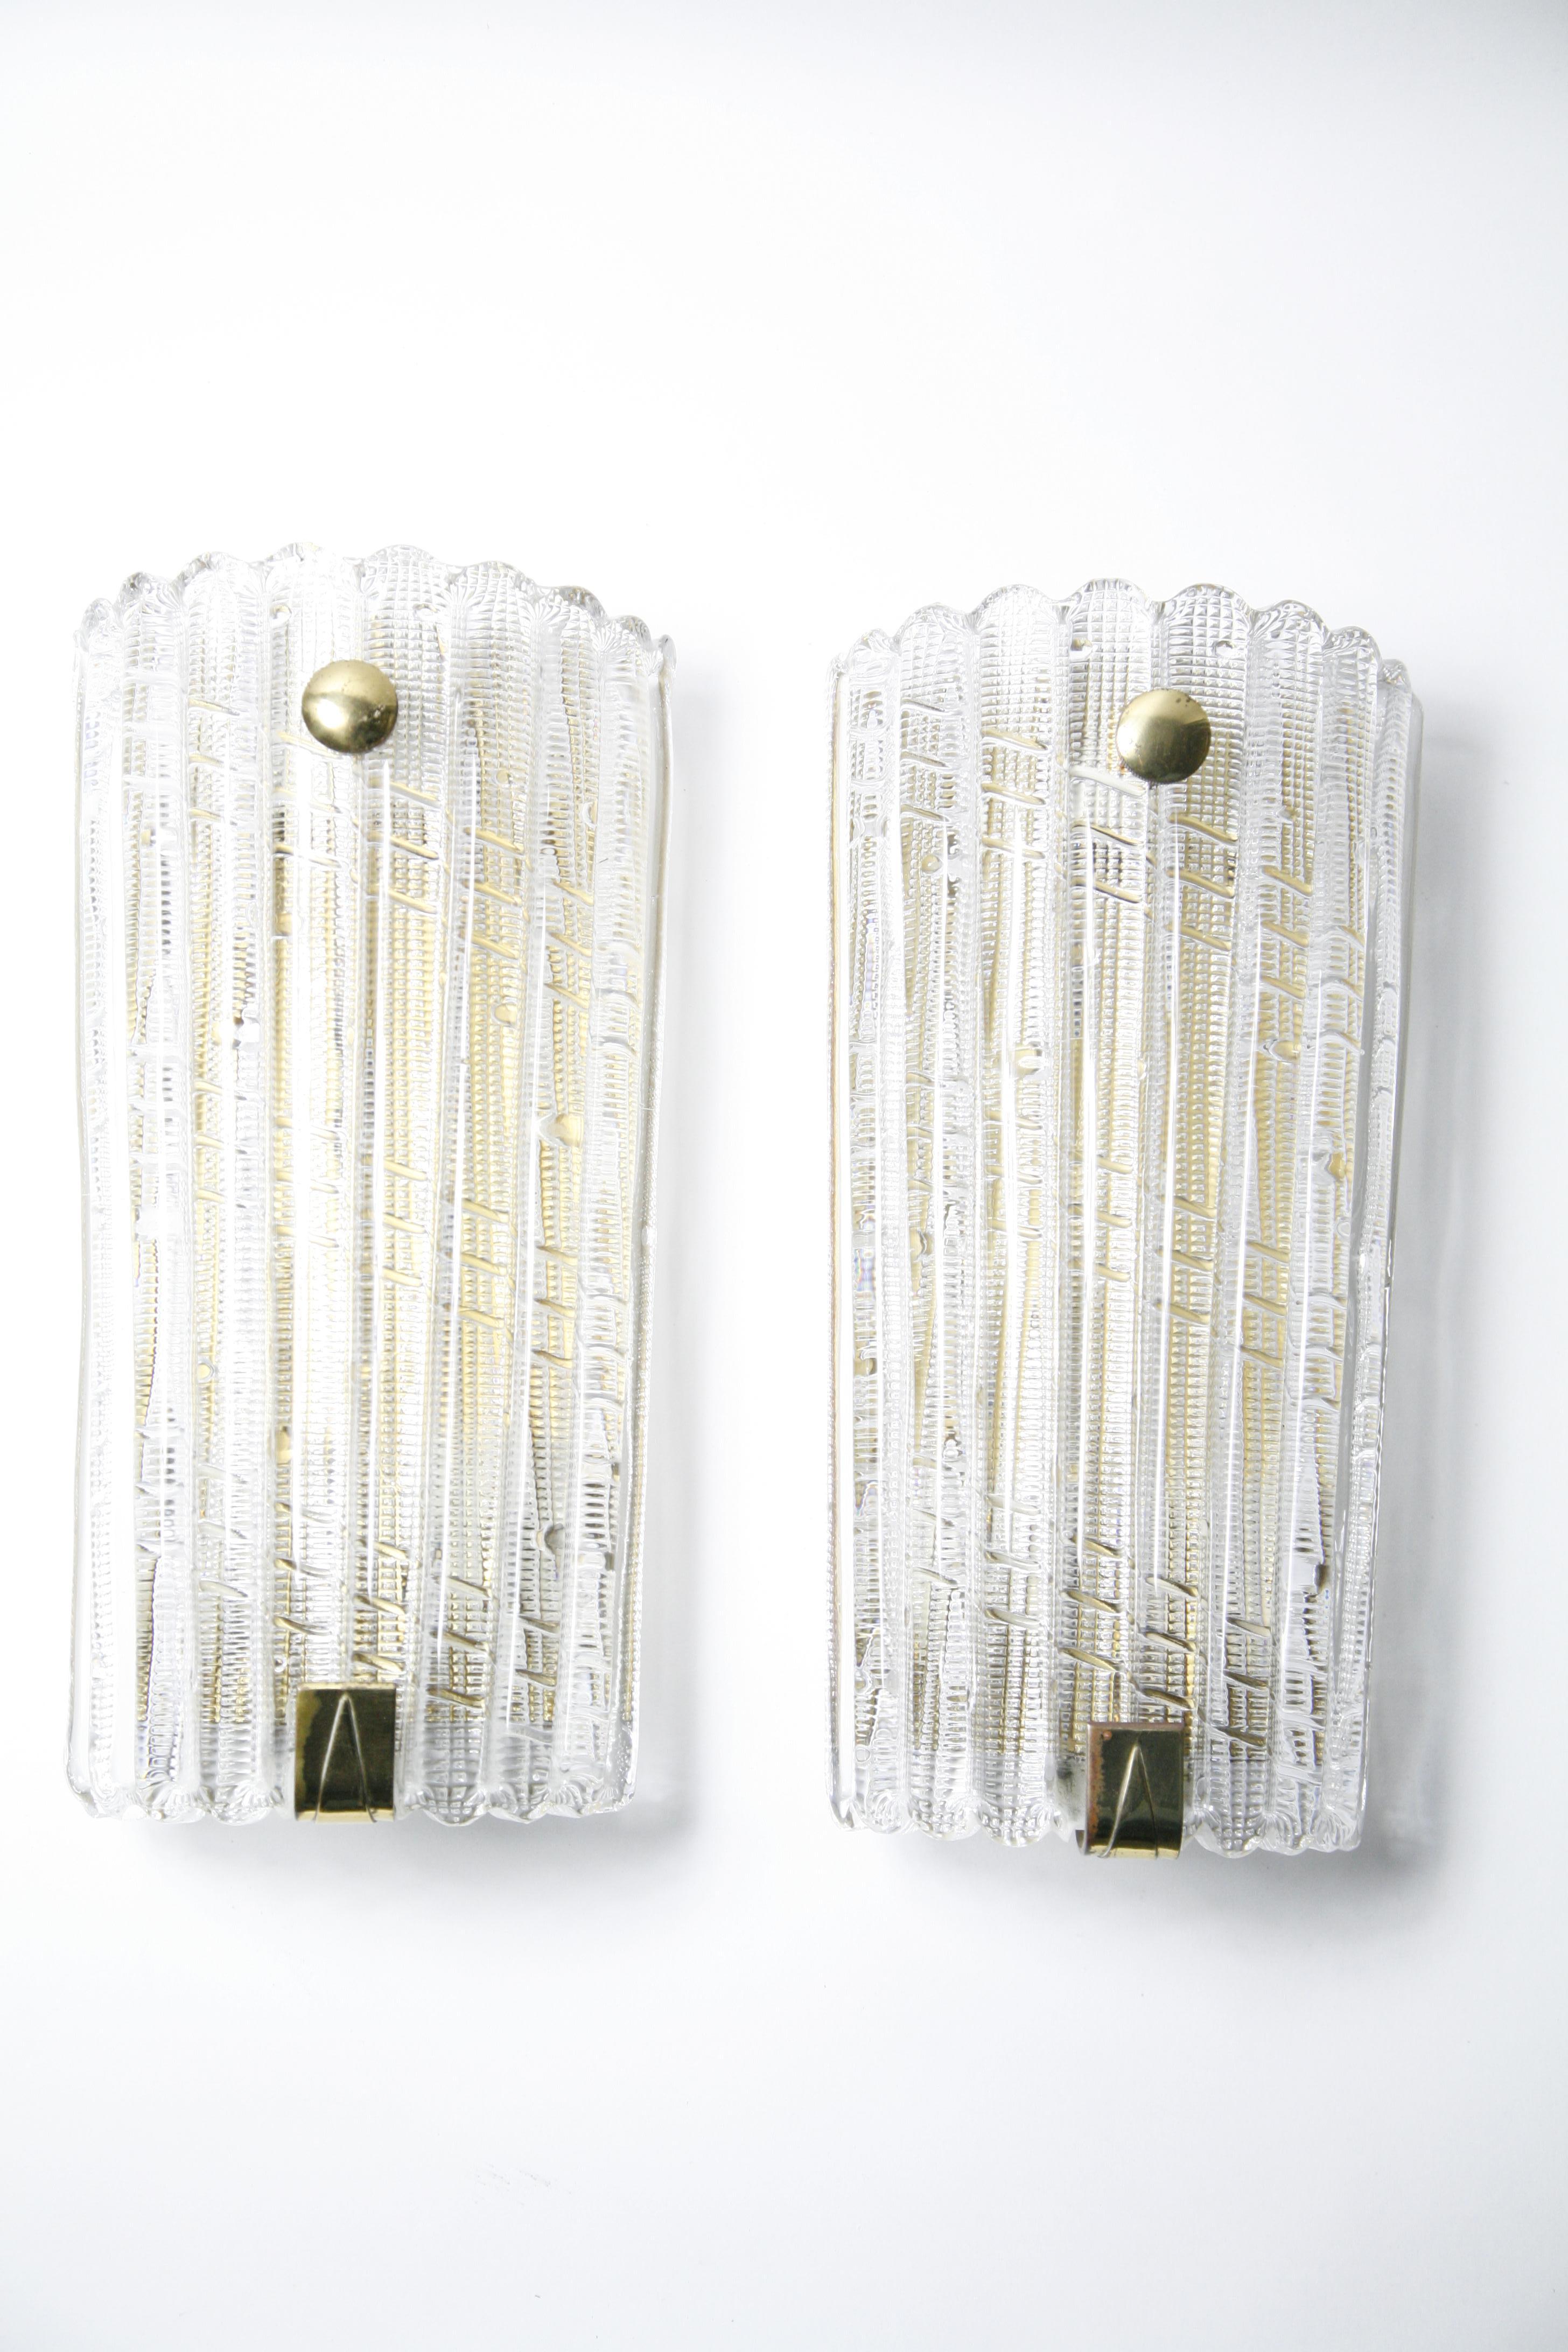 Cast Large Pair of Orrefors Crystal and Brass Sconces by Carl Fagerlund, Sweden, 1950 For Sale